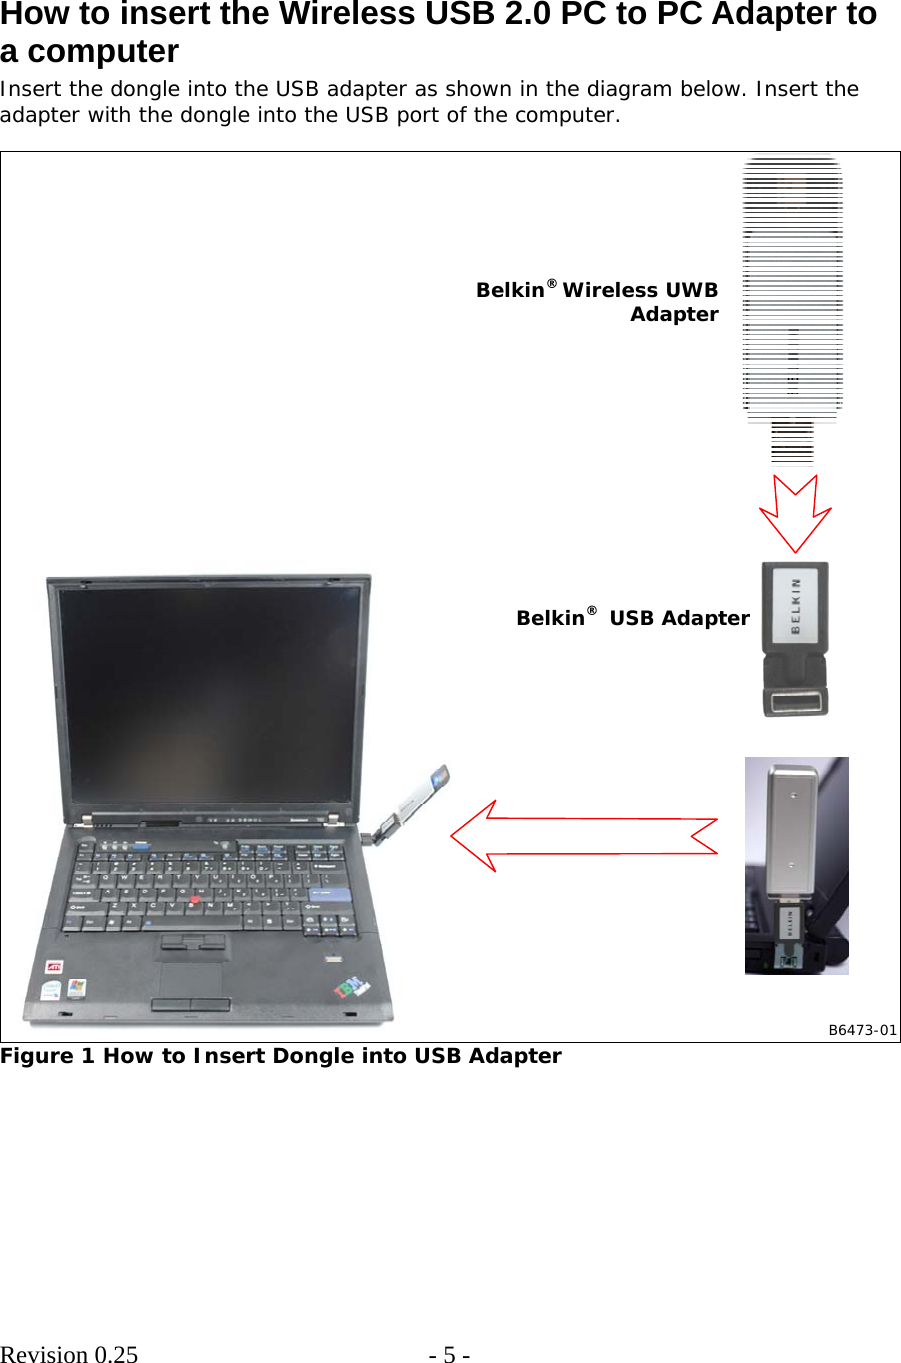        Revision 0.25  - 5 -      How to insert the Wireless USB 2.0 PC to PC Adapter to a computer Insert the dongle into the USB adapter as shown in the diagram below. Insert the adapter with the dongle into the USB port of the computer.   B6473-01Belkin® Wireless UWB AdapterBelkin®  USB Adapter Figure 1 How to Insert Dongle into USB Adapter  